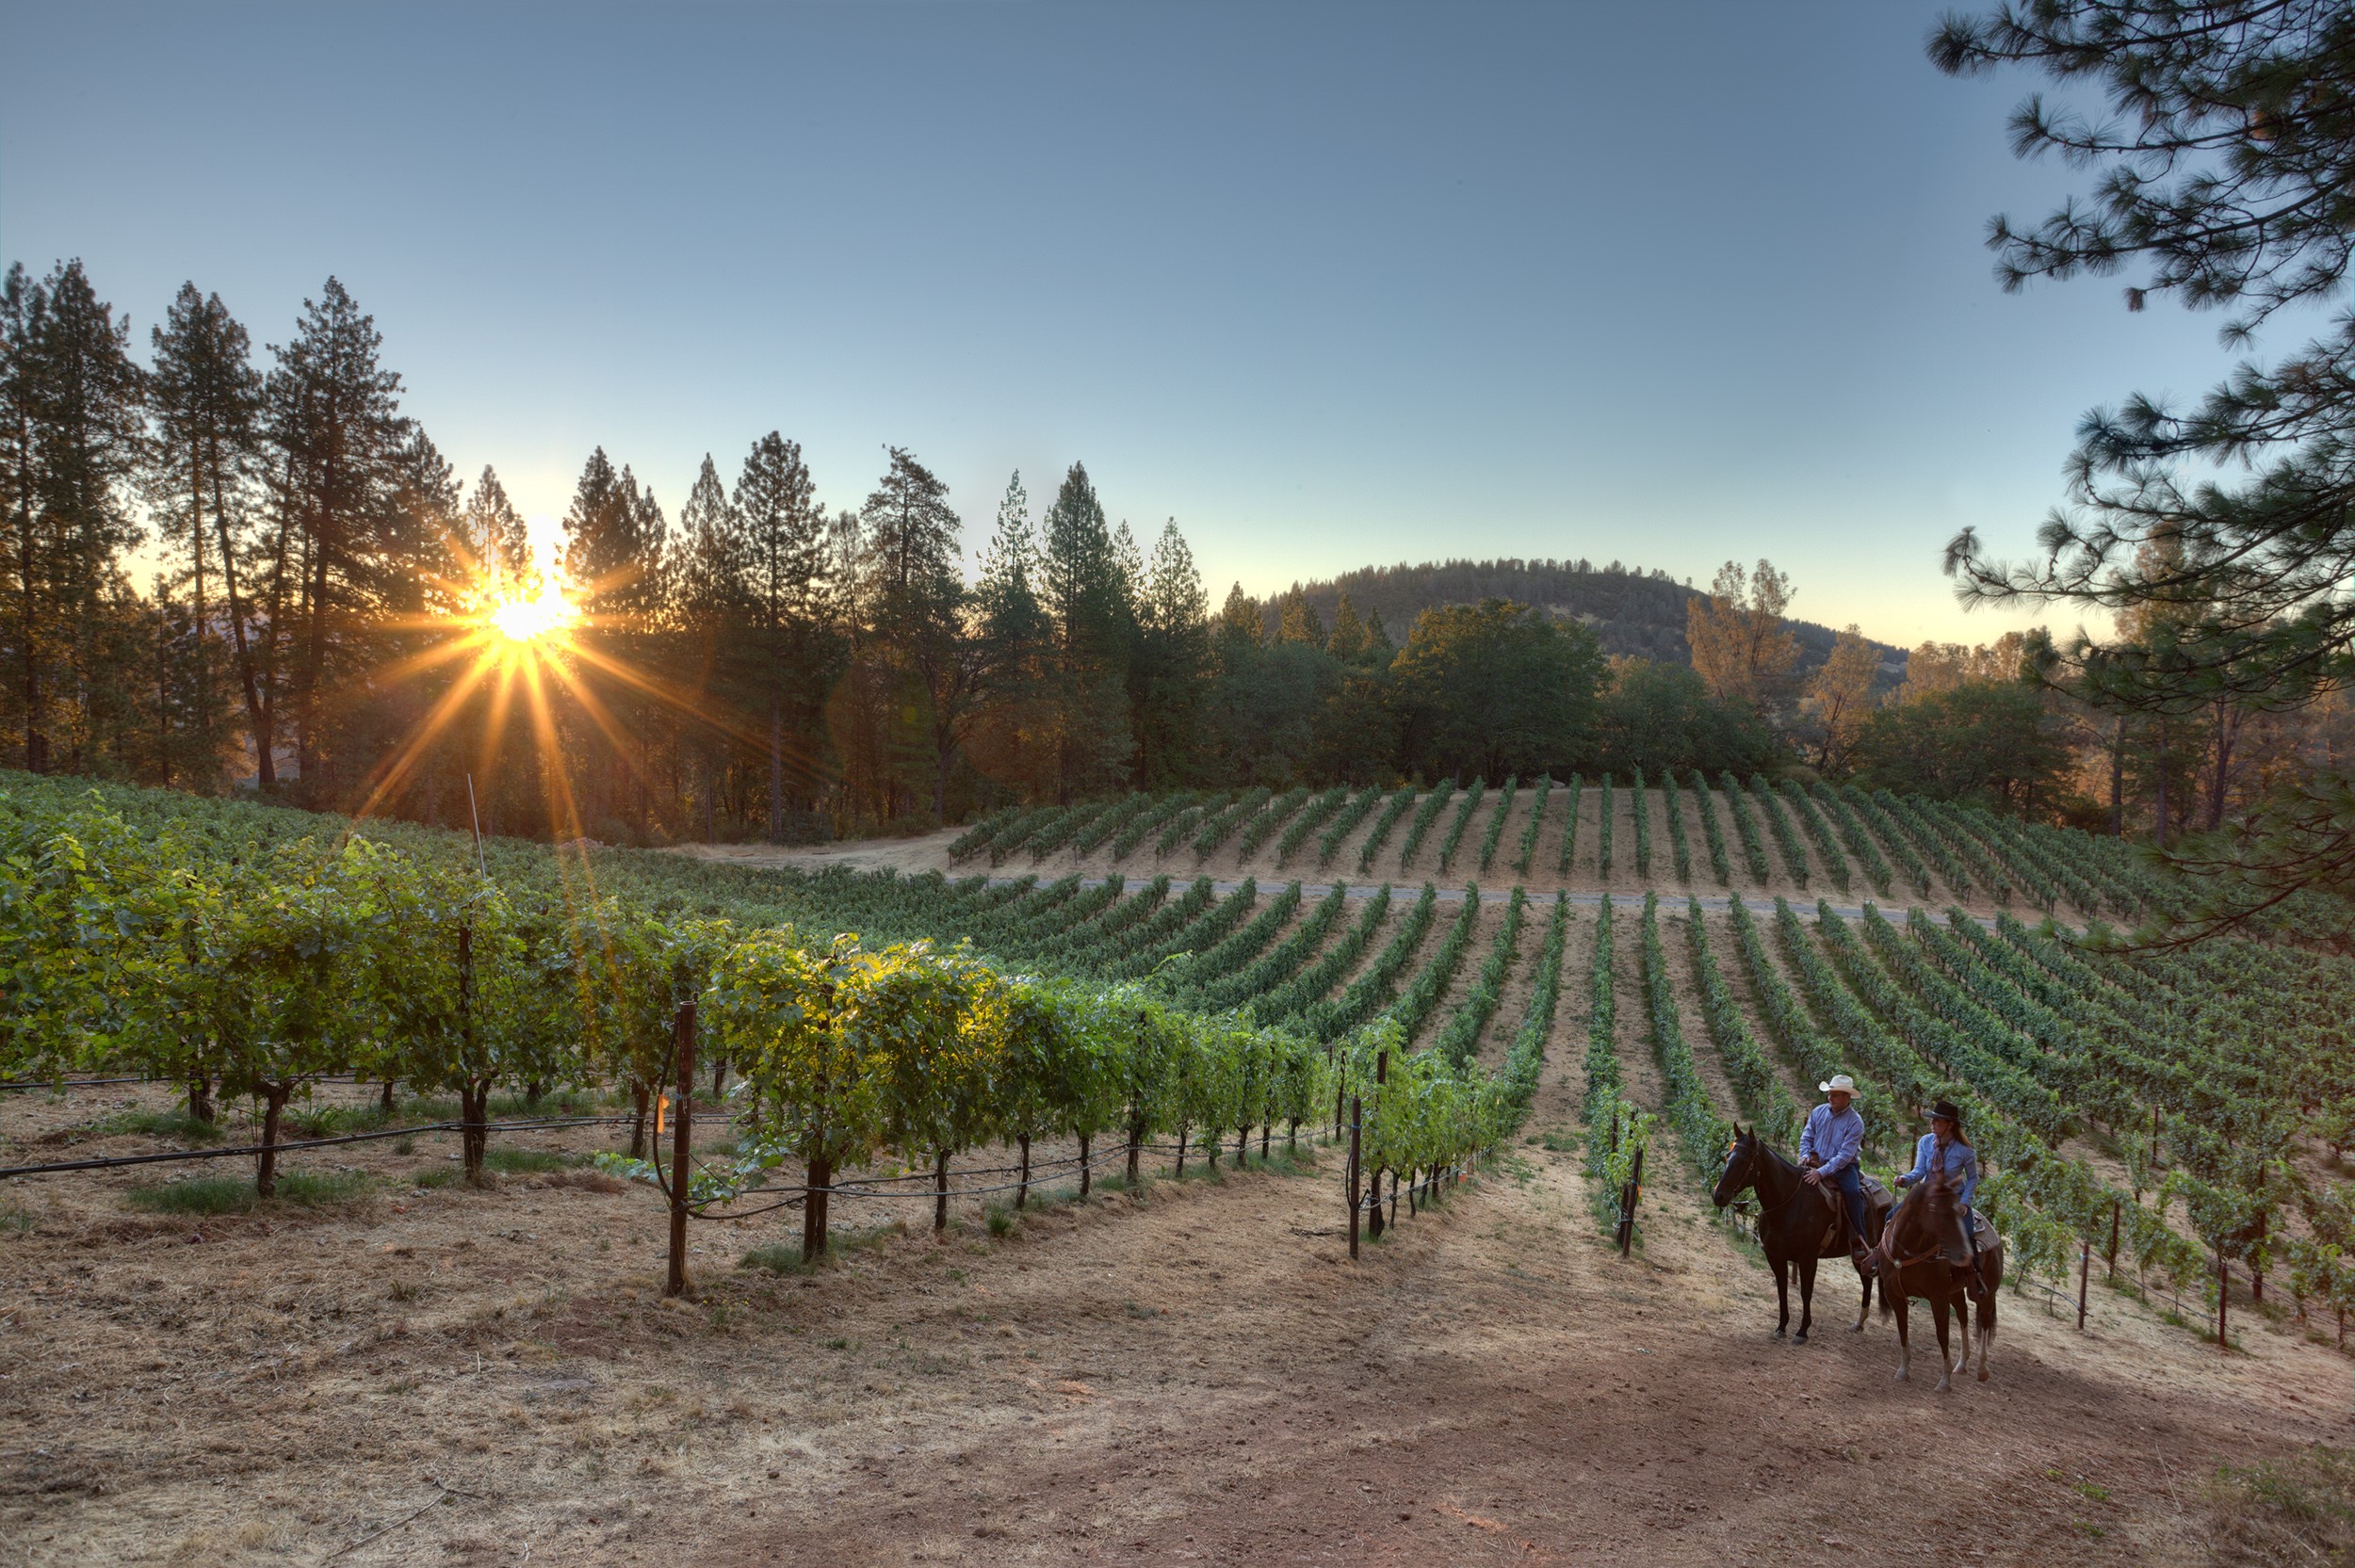 Lake & Mendocino County Wines Share a Passion